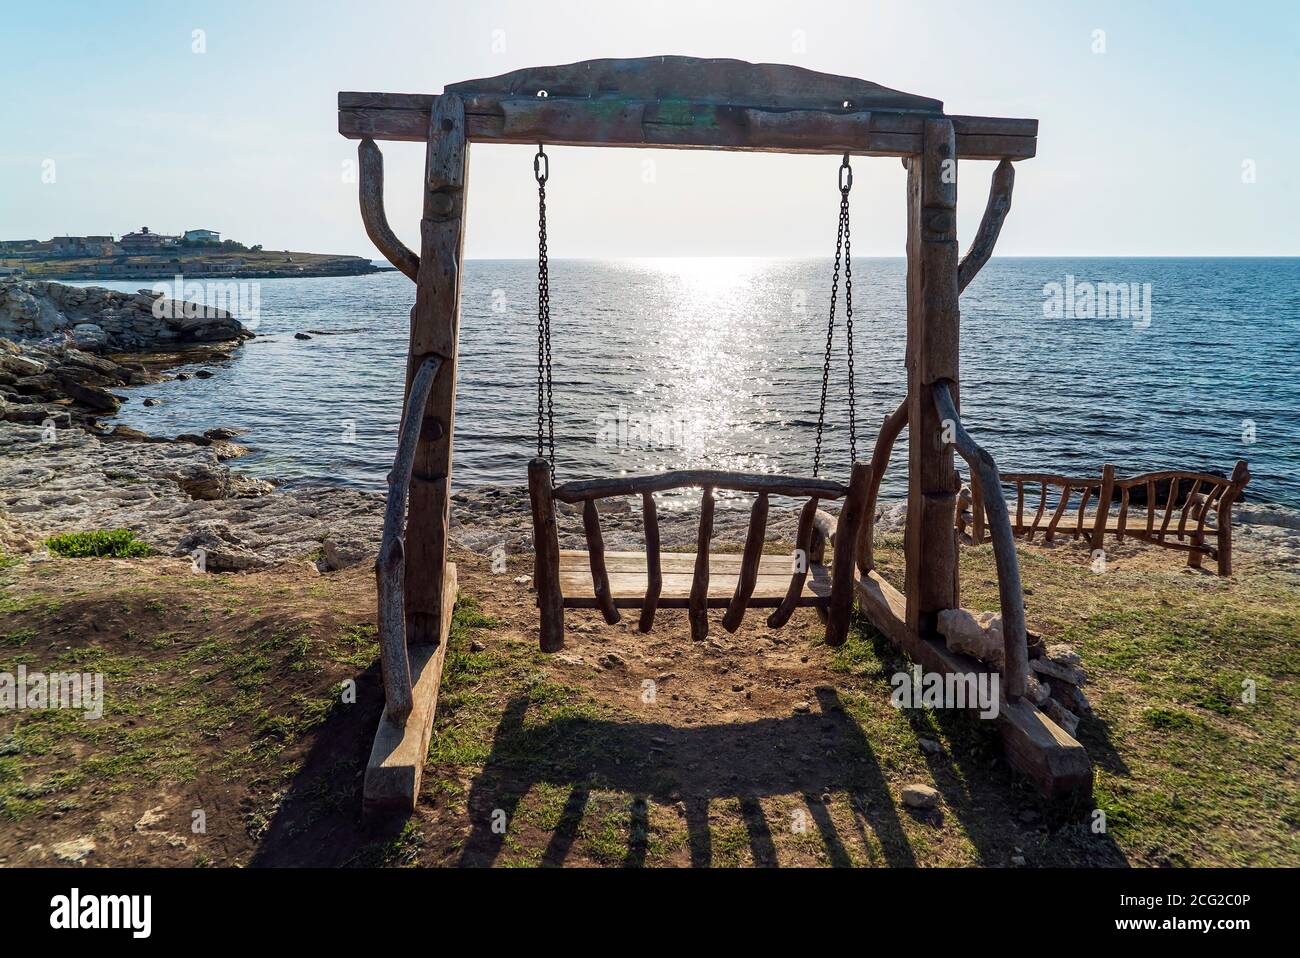 Wooden swing on the beach in the rays of the setting sun Stock Photo